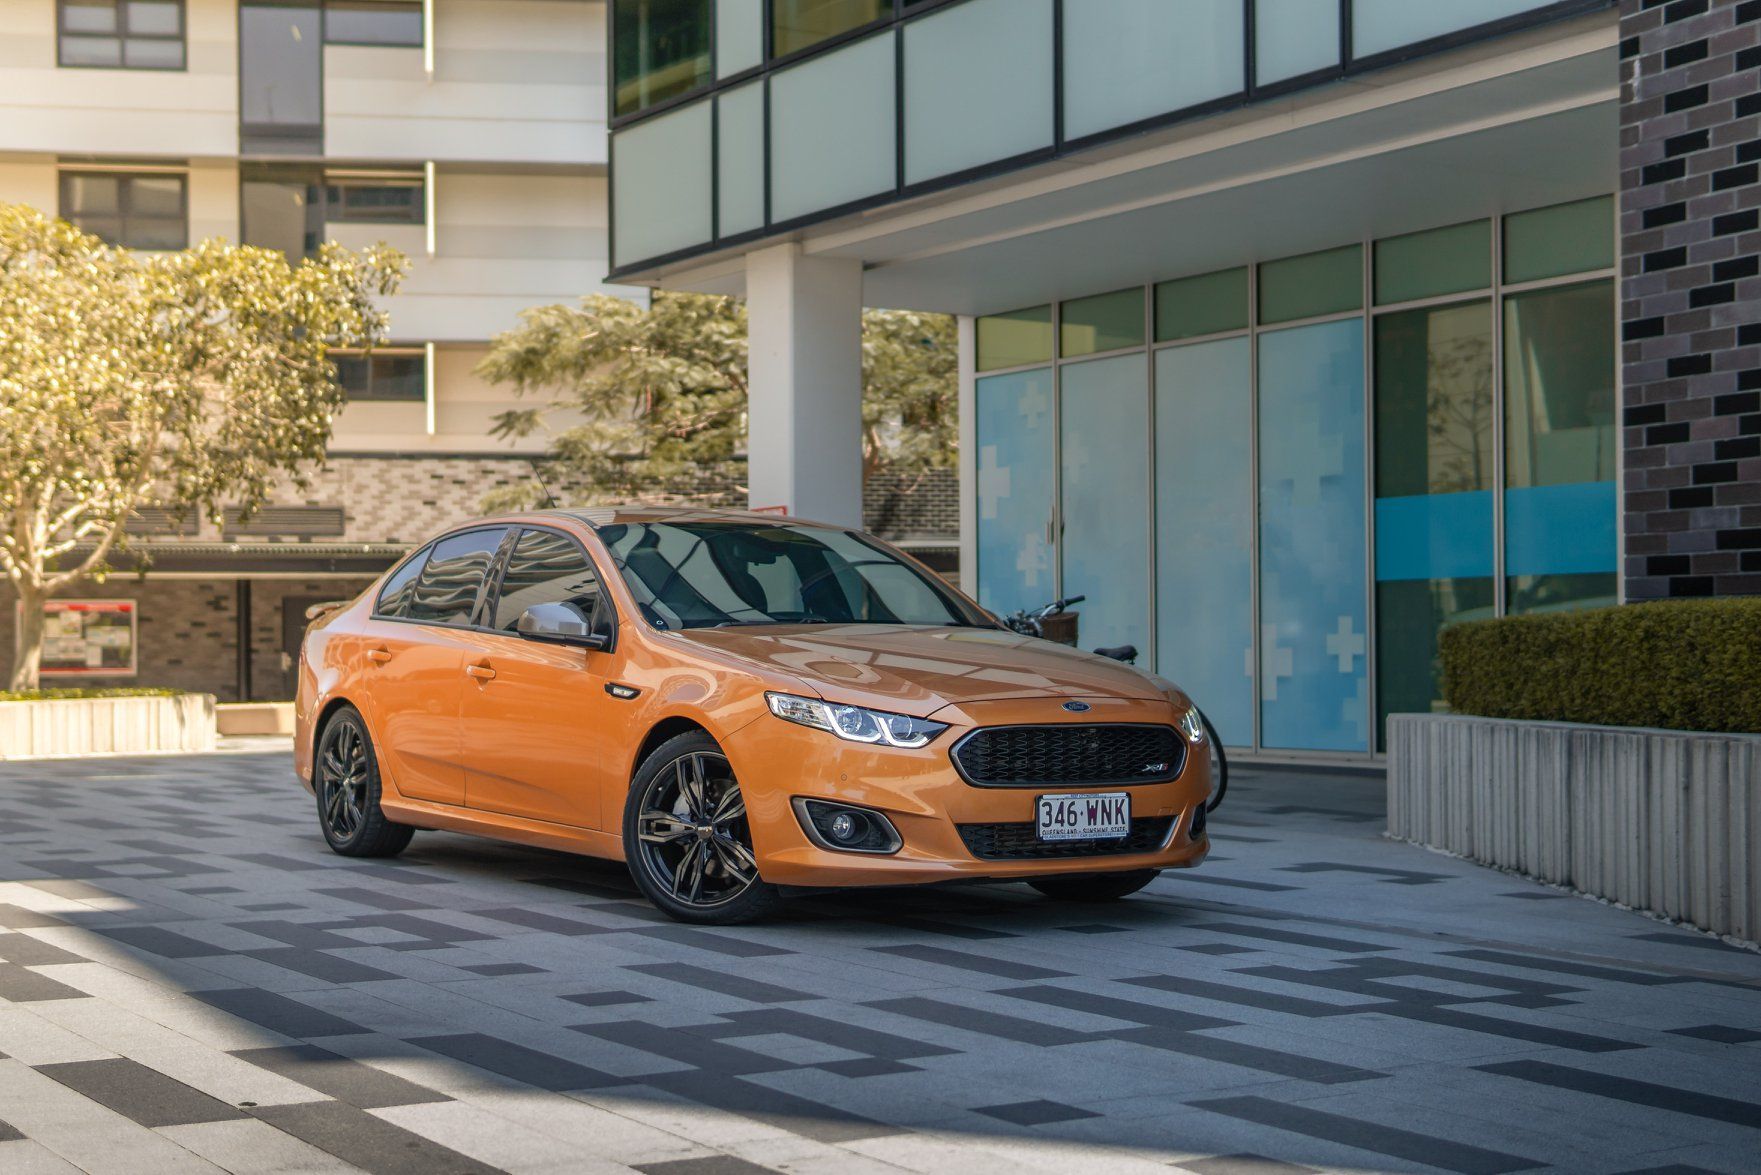 A Ford Falcon XR6 parked near a hotel